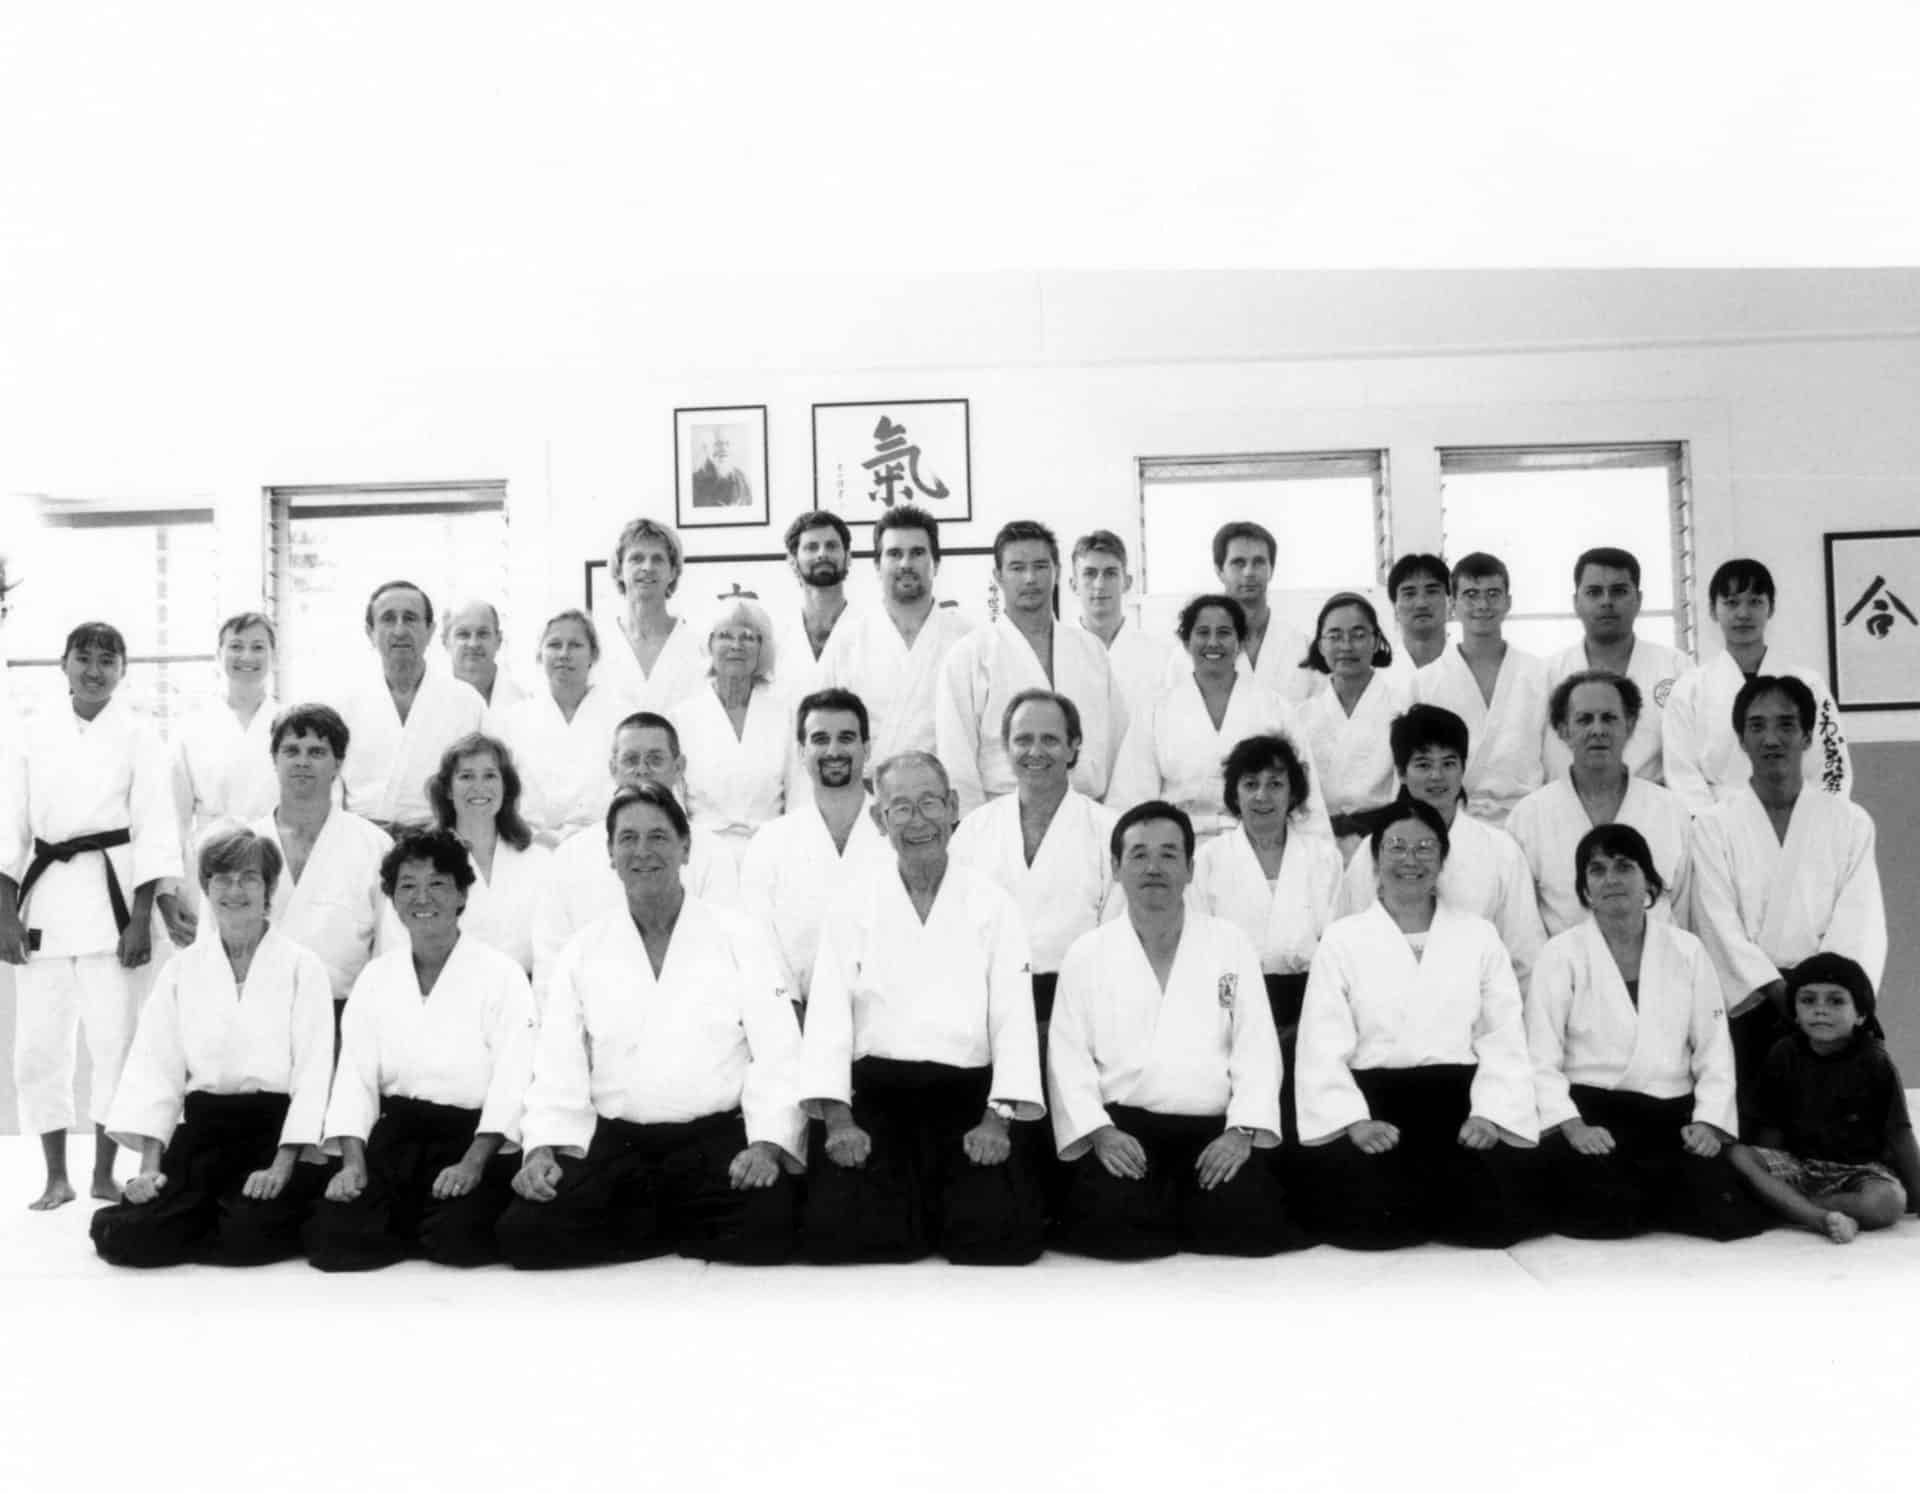 45th anniversary of aikido on Maui held in August of 1998